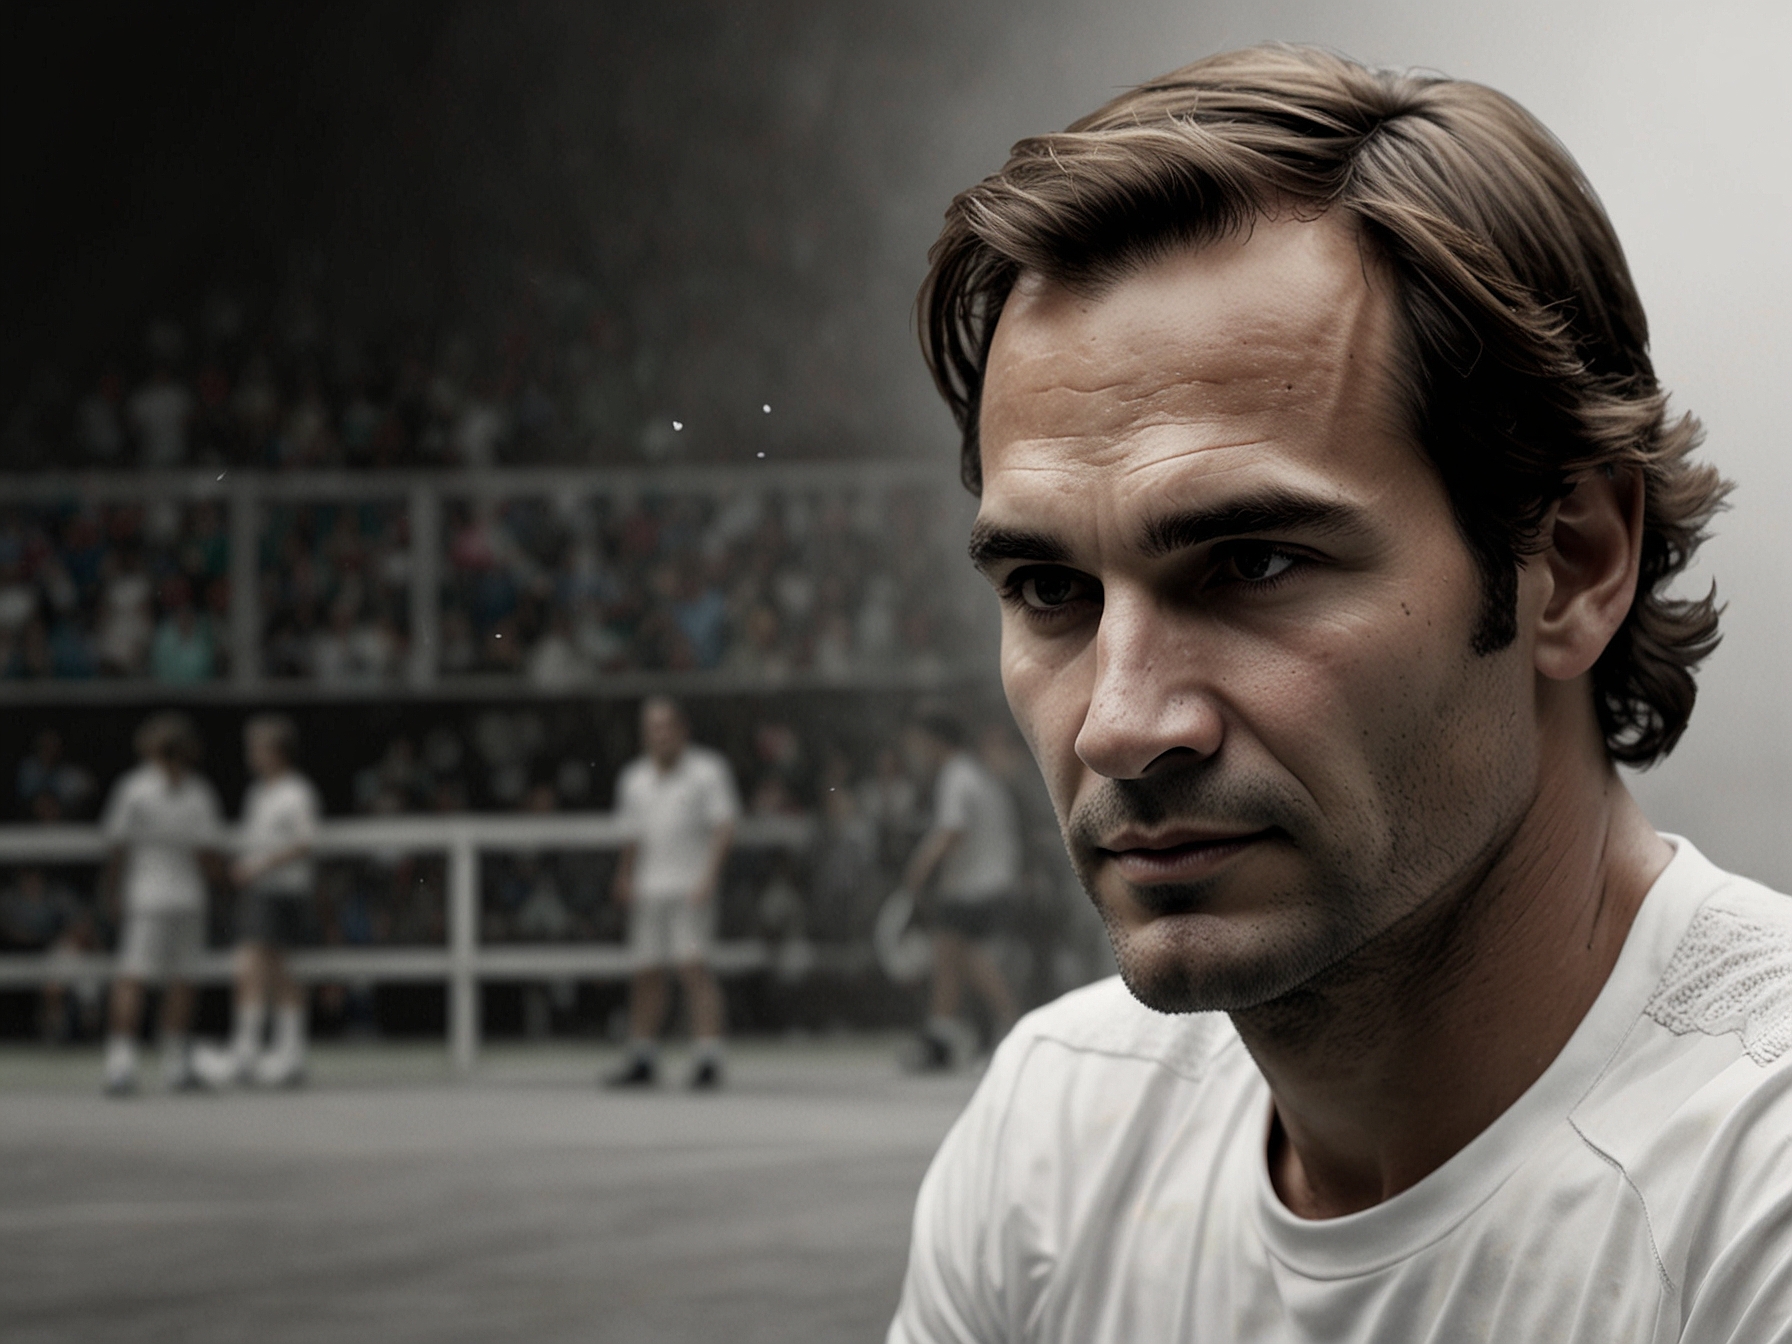 A still frame from the Amazon documentary ‘Federer: Twelve Final Days’ featuring exclusive behind-the-scenes footage.